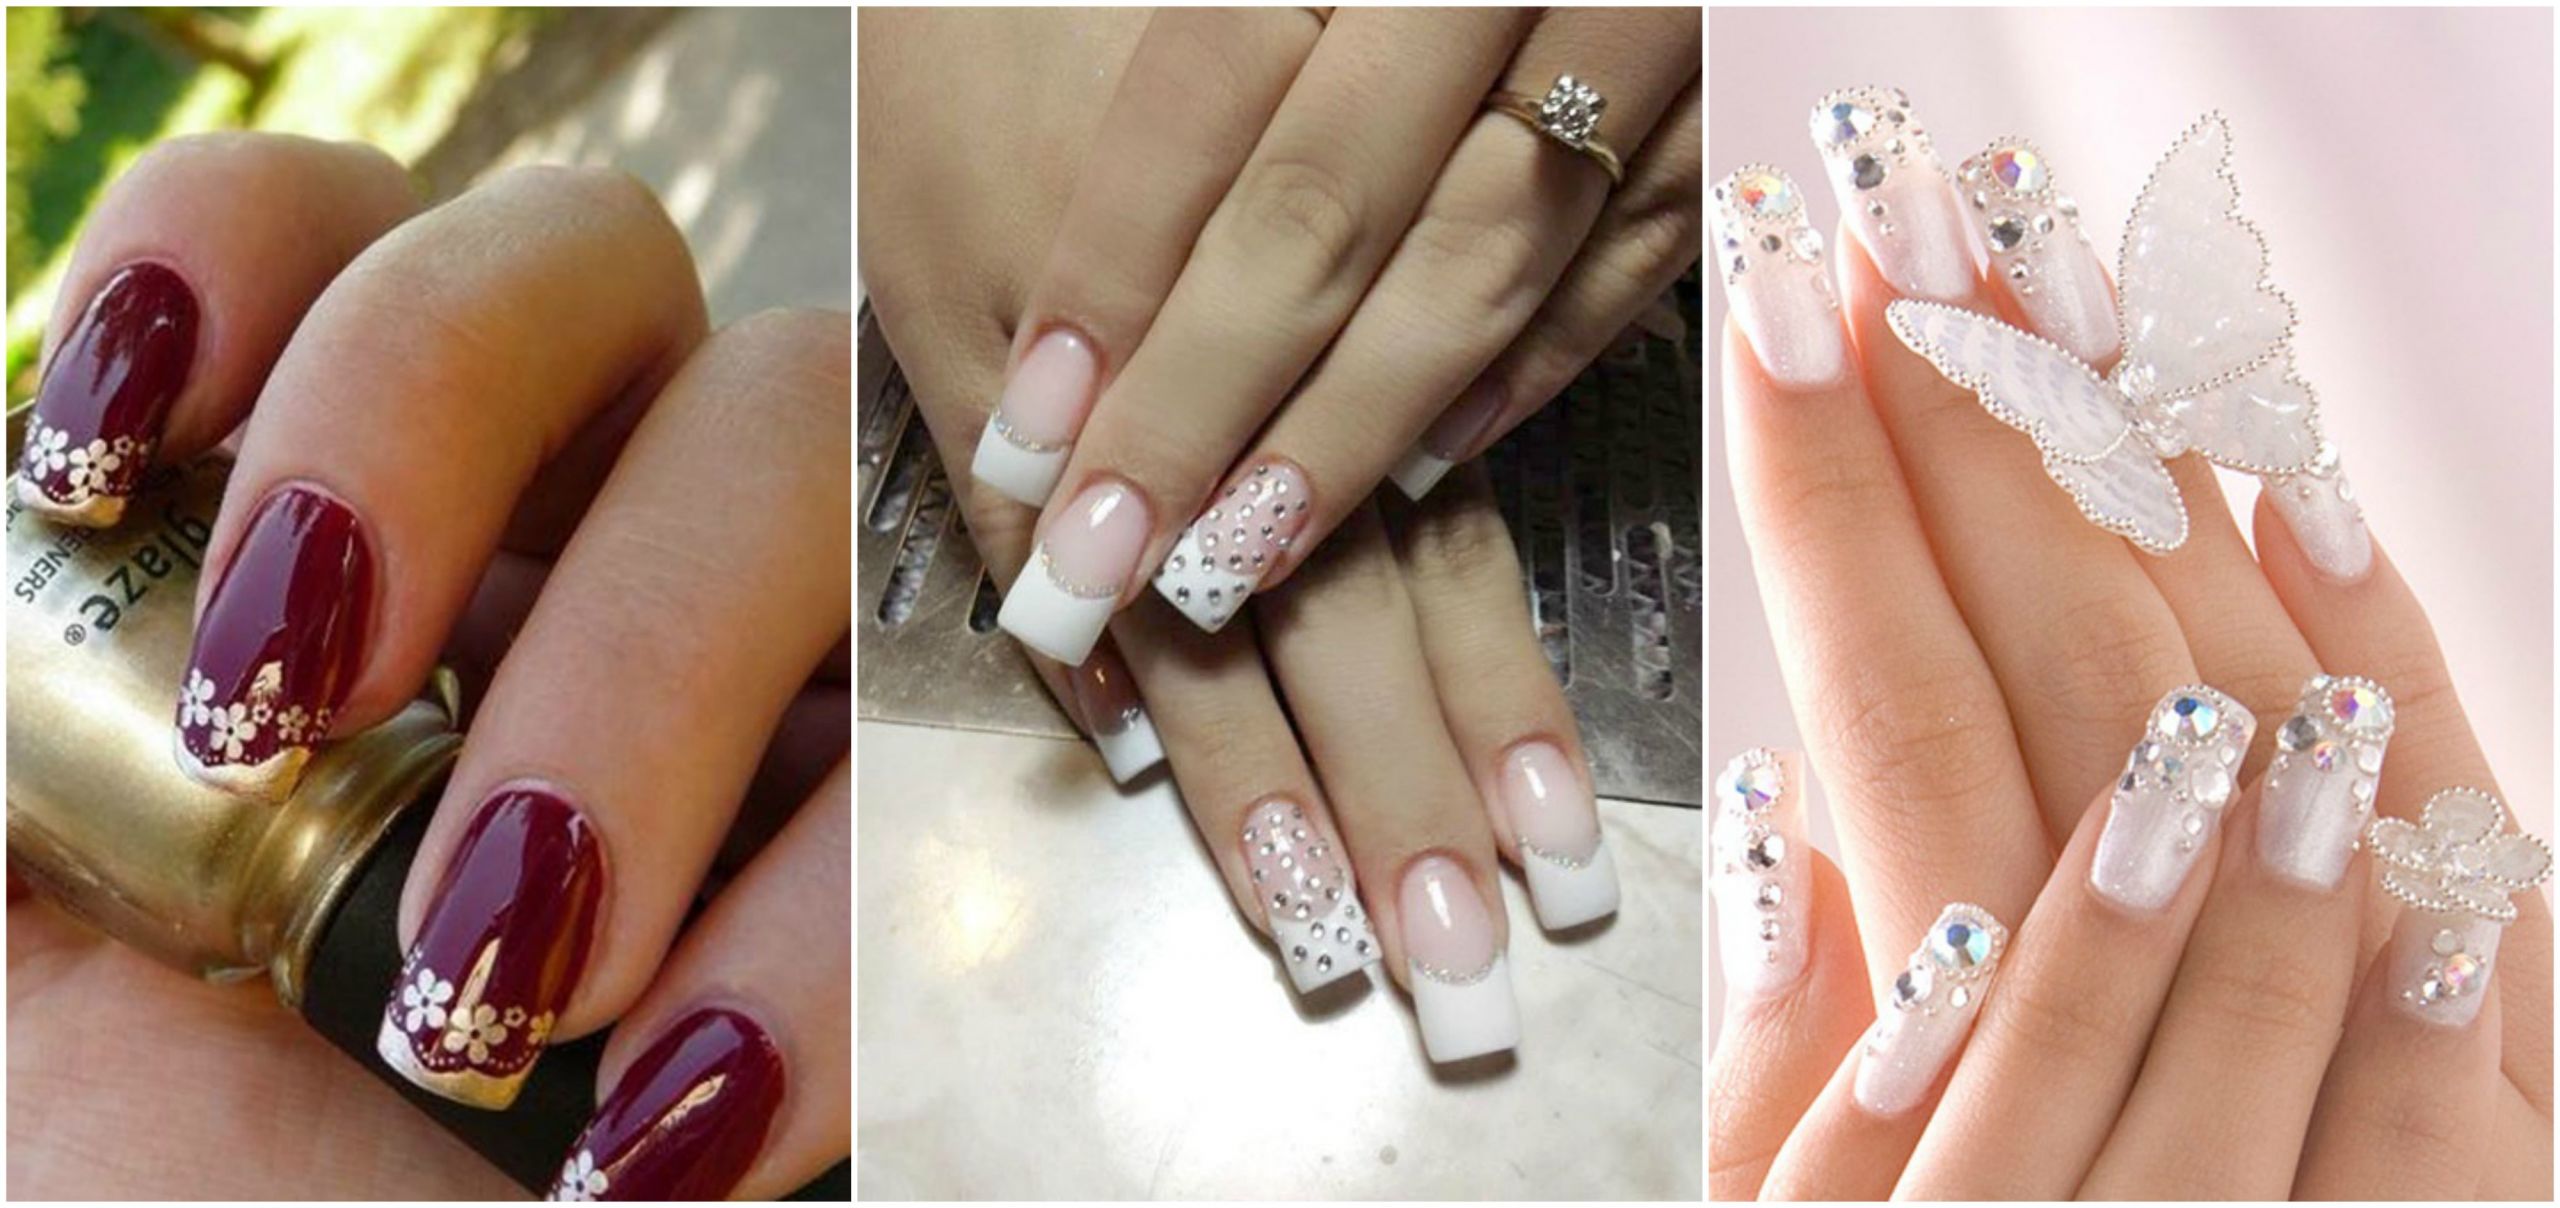 Wedding Day Nail Designs
 Wedding Nail Art Makes You Look Stunning on Your Wedding